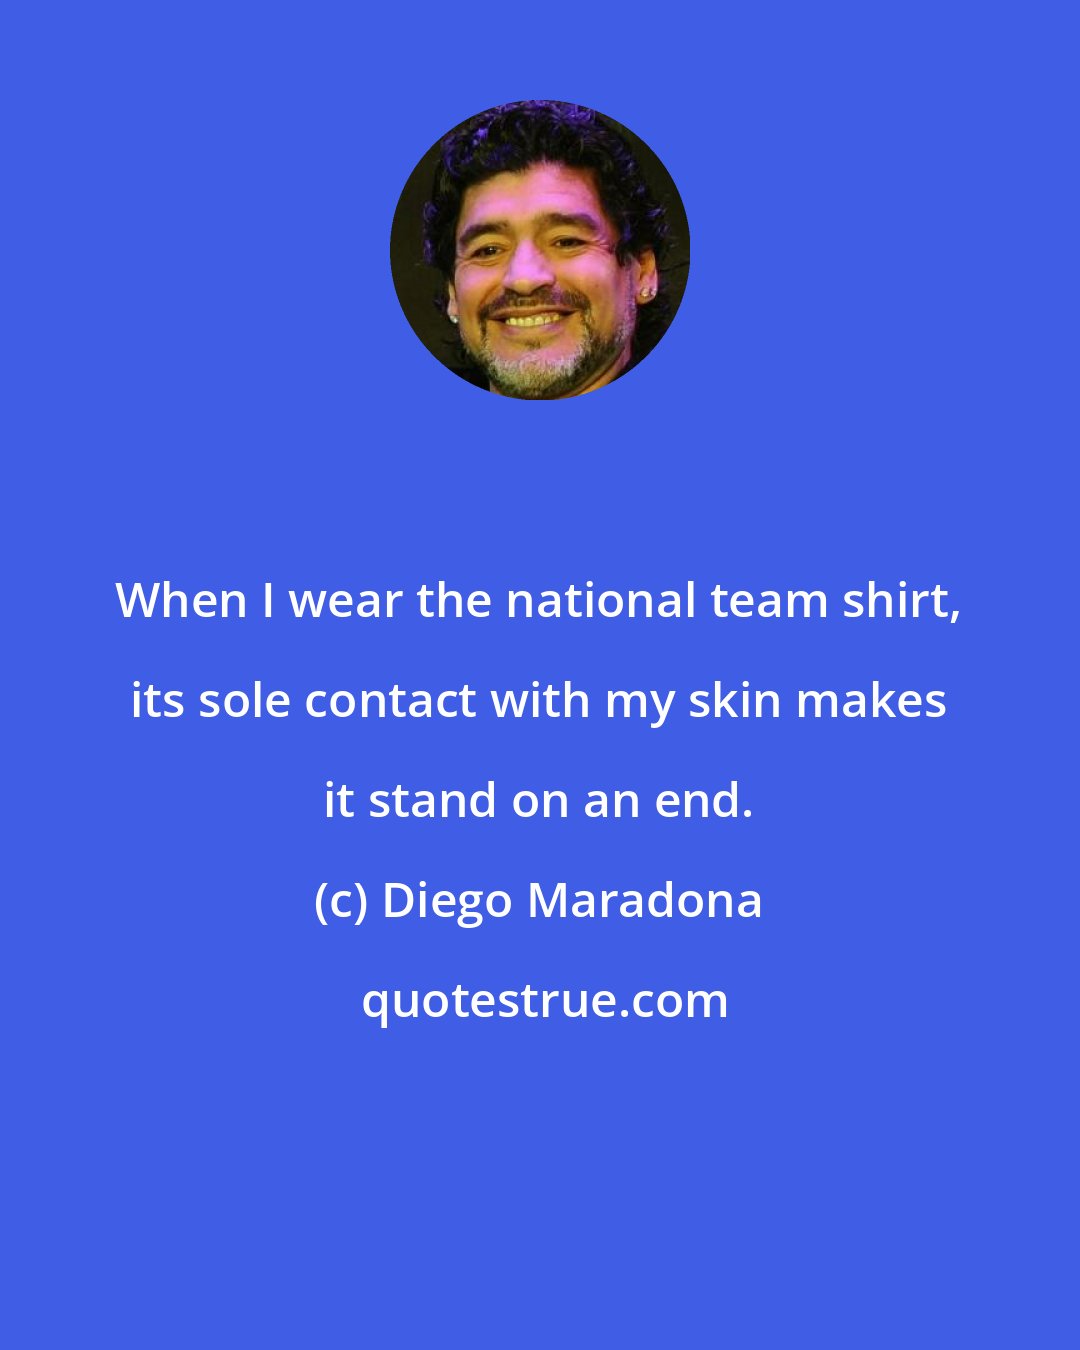 Diego Maradona: When I wear the national team shirt, its sole contact with my skin makes it stand on an end.